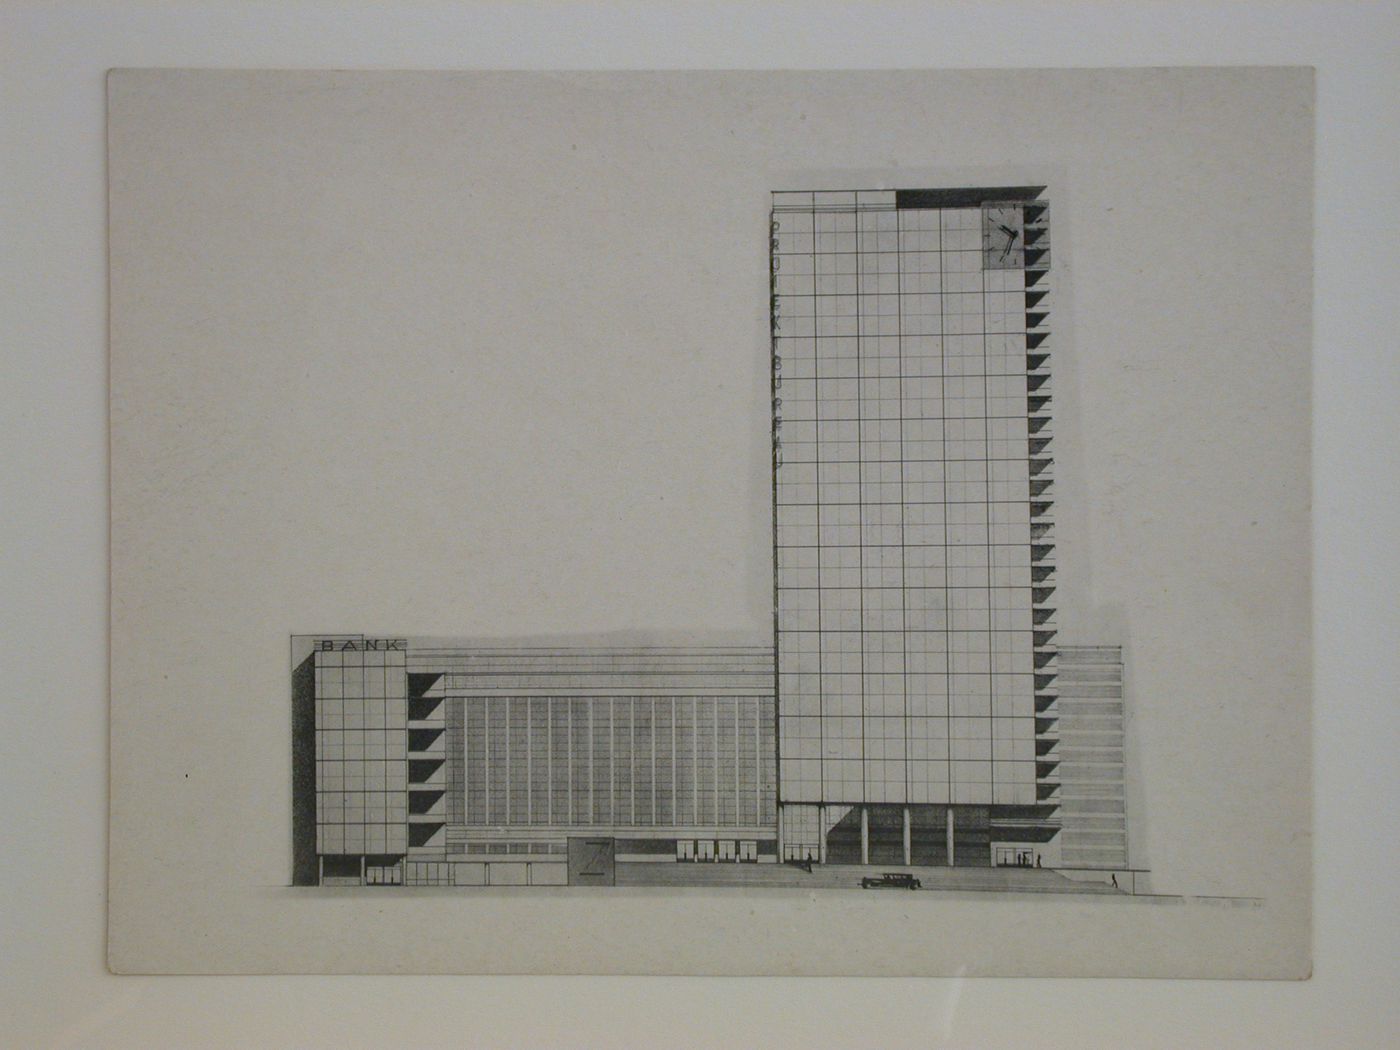 Photograph of an elevation for the Building of Industry, Sverdlovsk, Soviet Union (now Ekaterinburg, Russia)